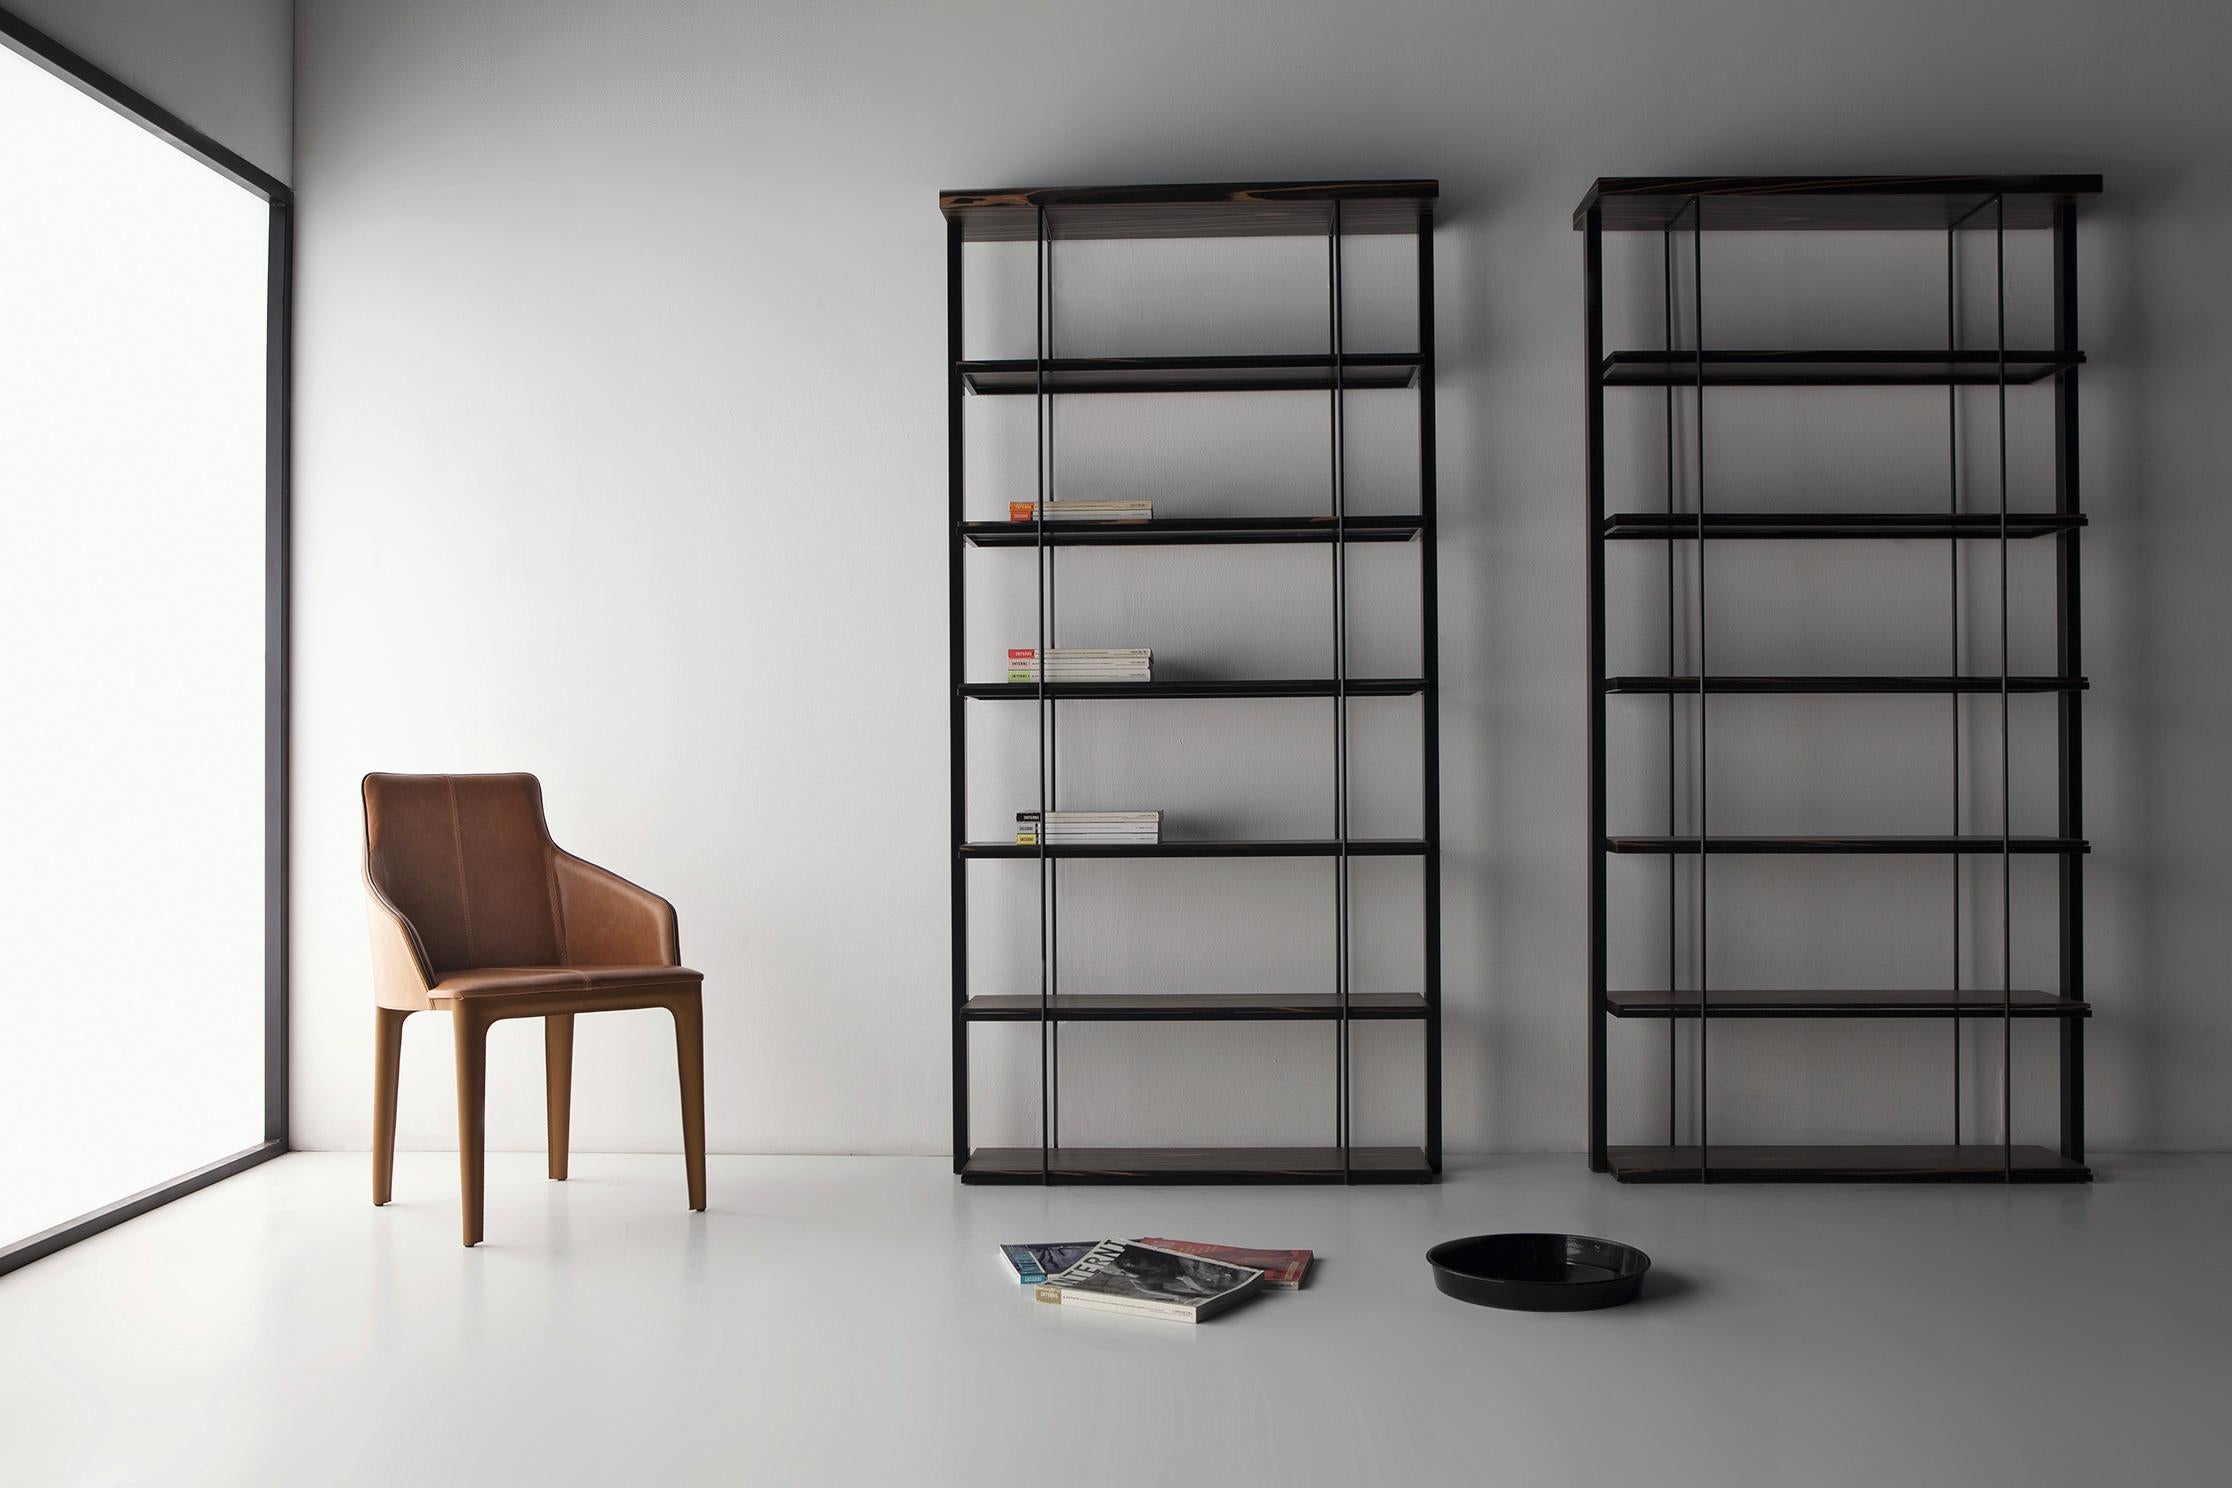 Wall Bookcase by Doimo Brasil
Dimensions:  W 100 x D 30 x H 200 cm 
Materials: Structure: Aged steel, Shelf: Veneer or lacquer.
  

With the intention of providing good taste and personality, Doimo deciphers trends and follows the evolution of man